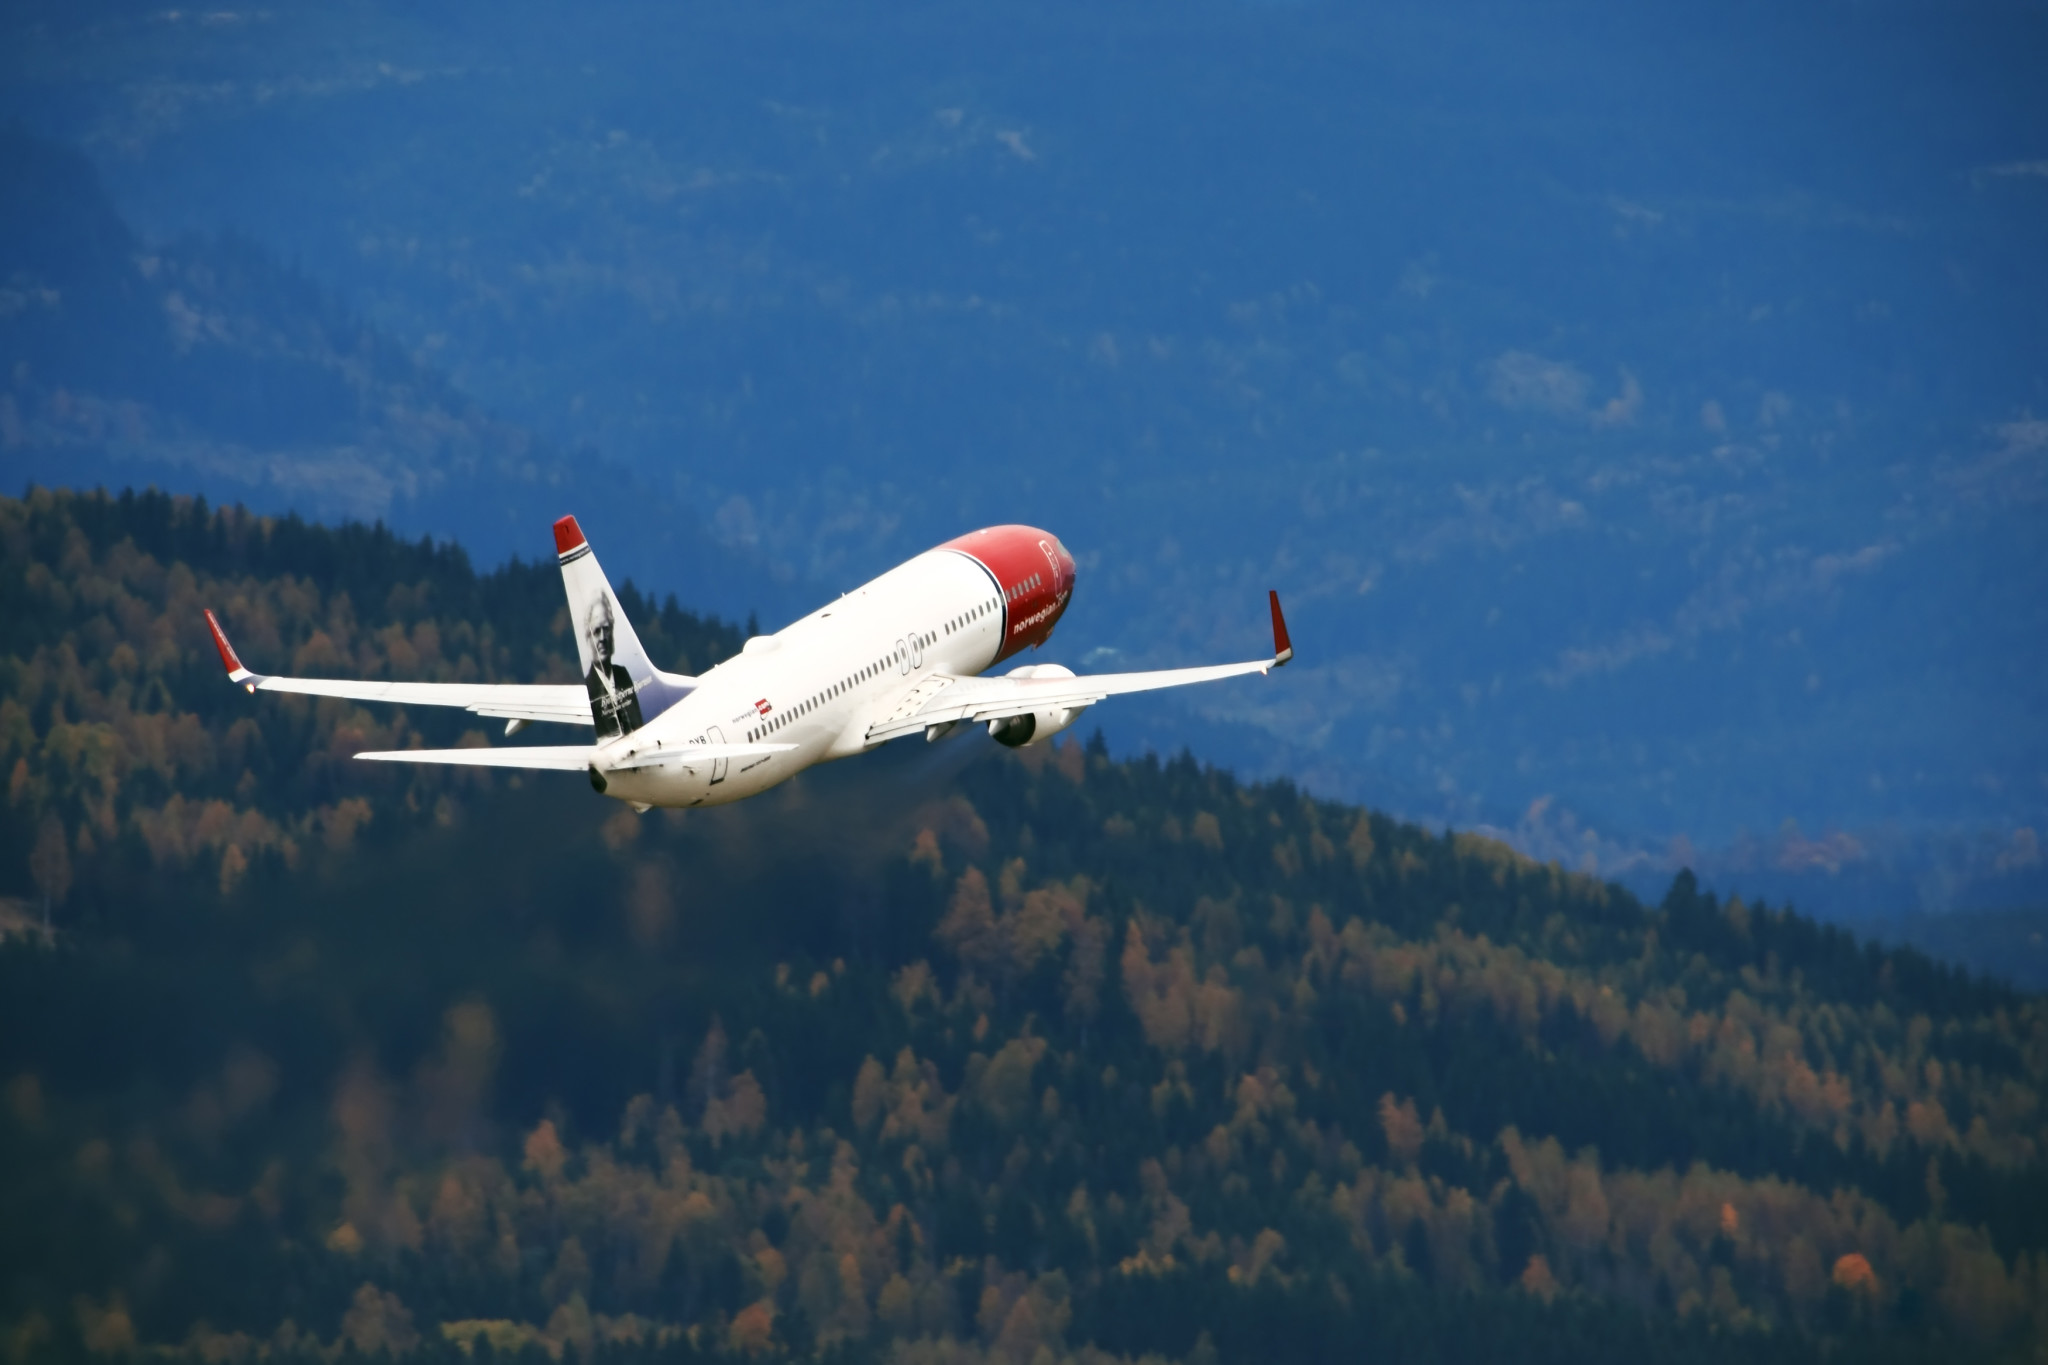 Norwegian announces 12 per cent increase in passenger number in August vs. same month the previous year 